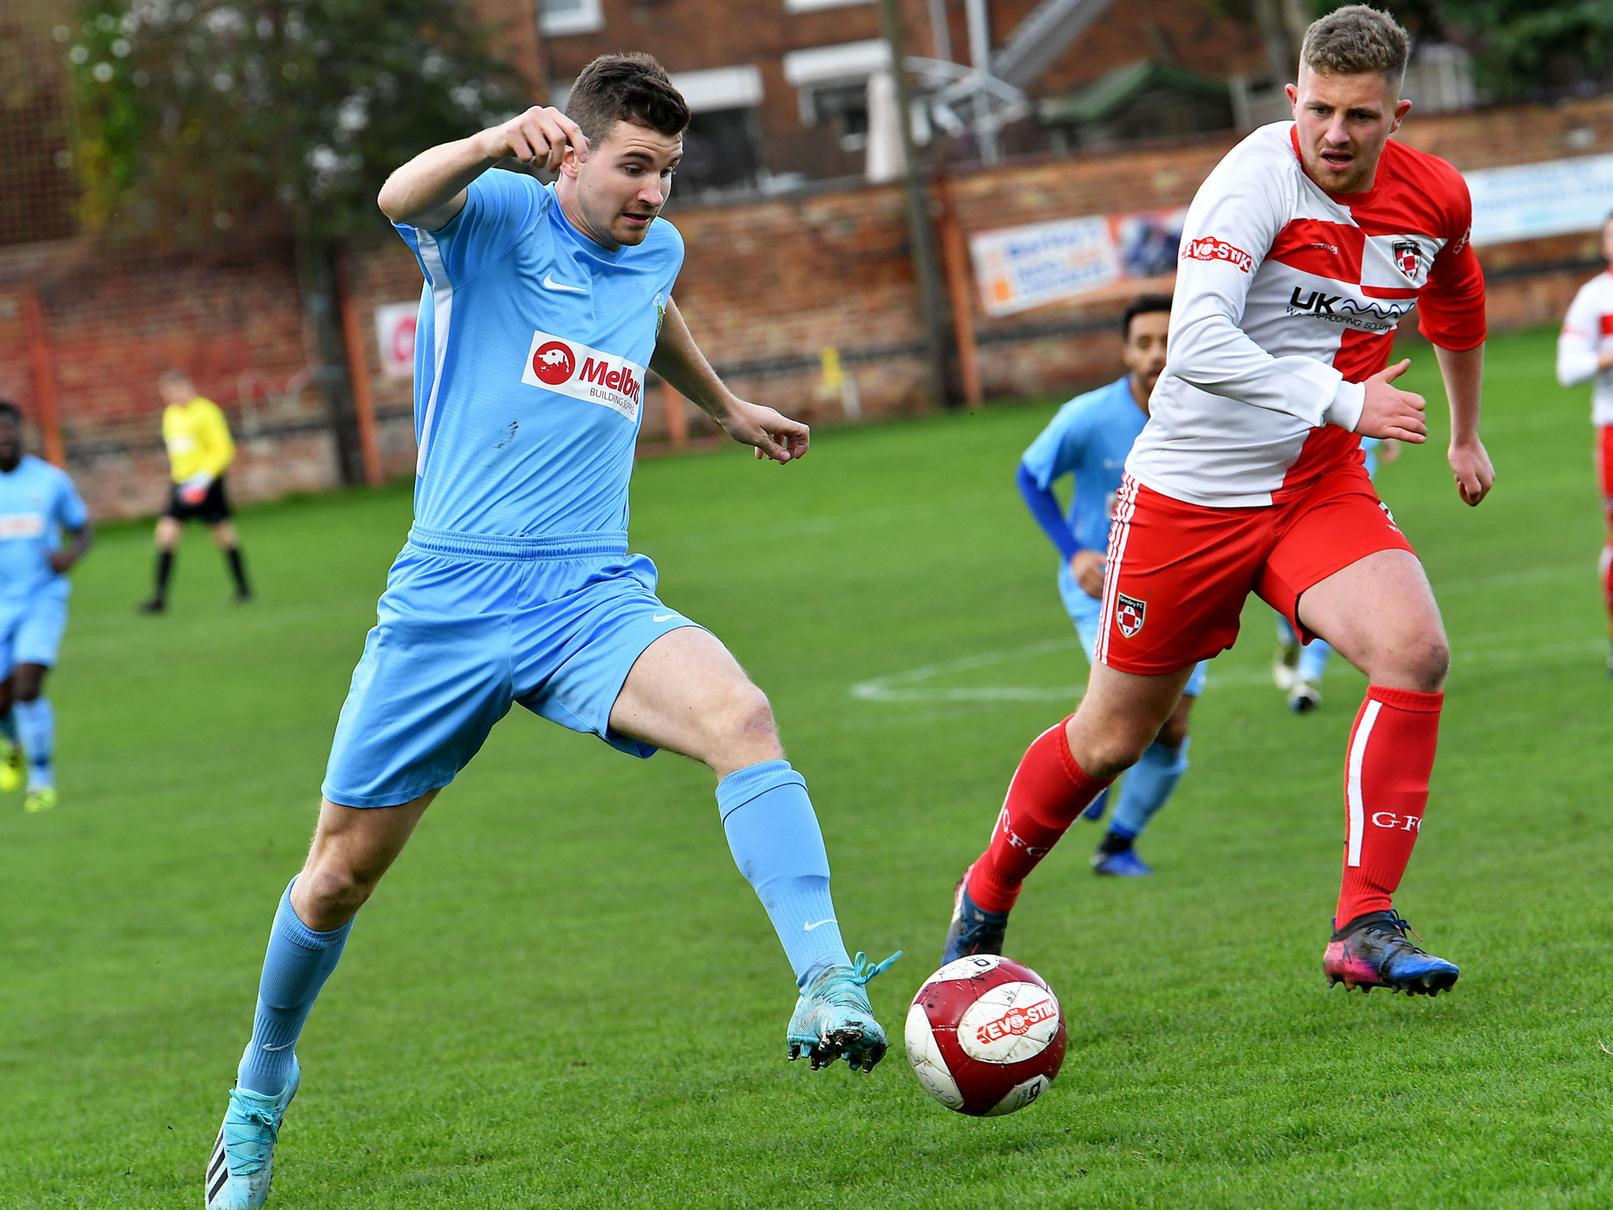 Charlie Evans on the wing for Valley in their 1-0 win which sees them through to the second round proper of the FA Vase